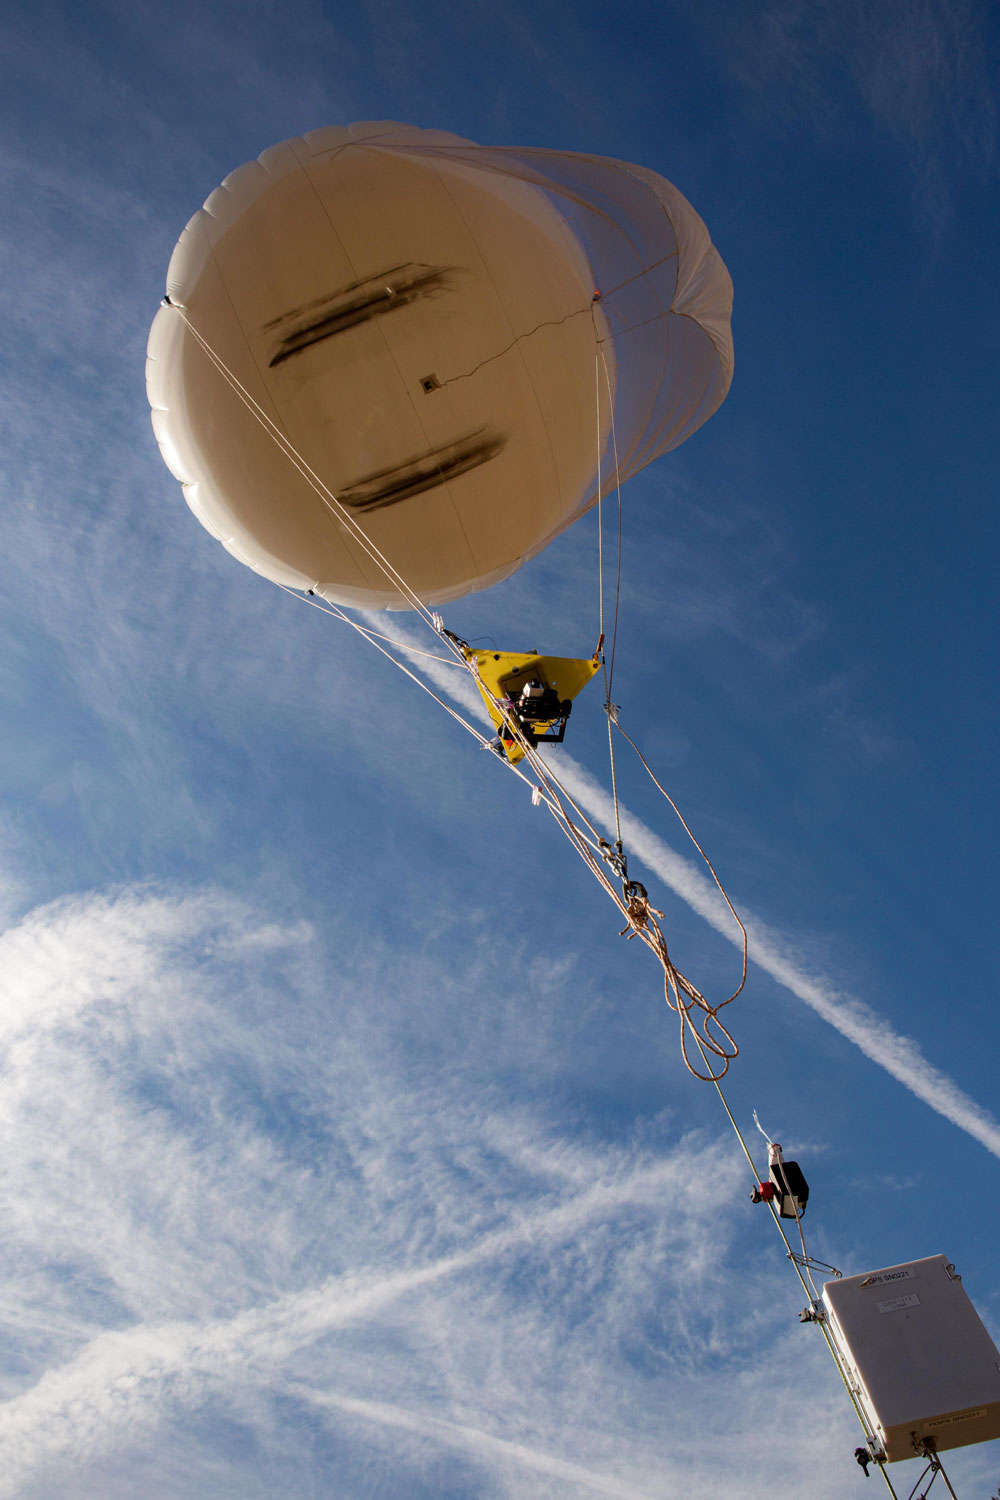 A tethered balloon is aloft in the sky with instruments installed on the tether.